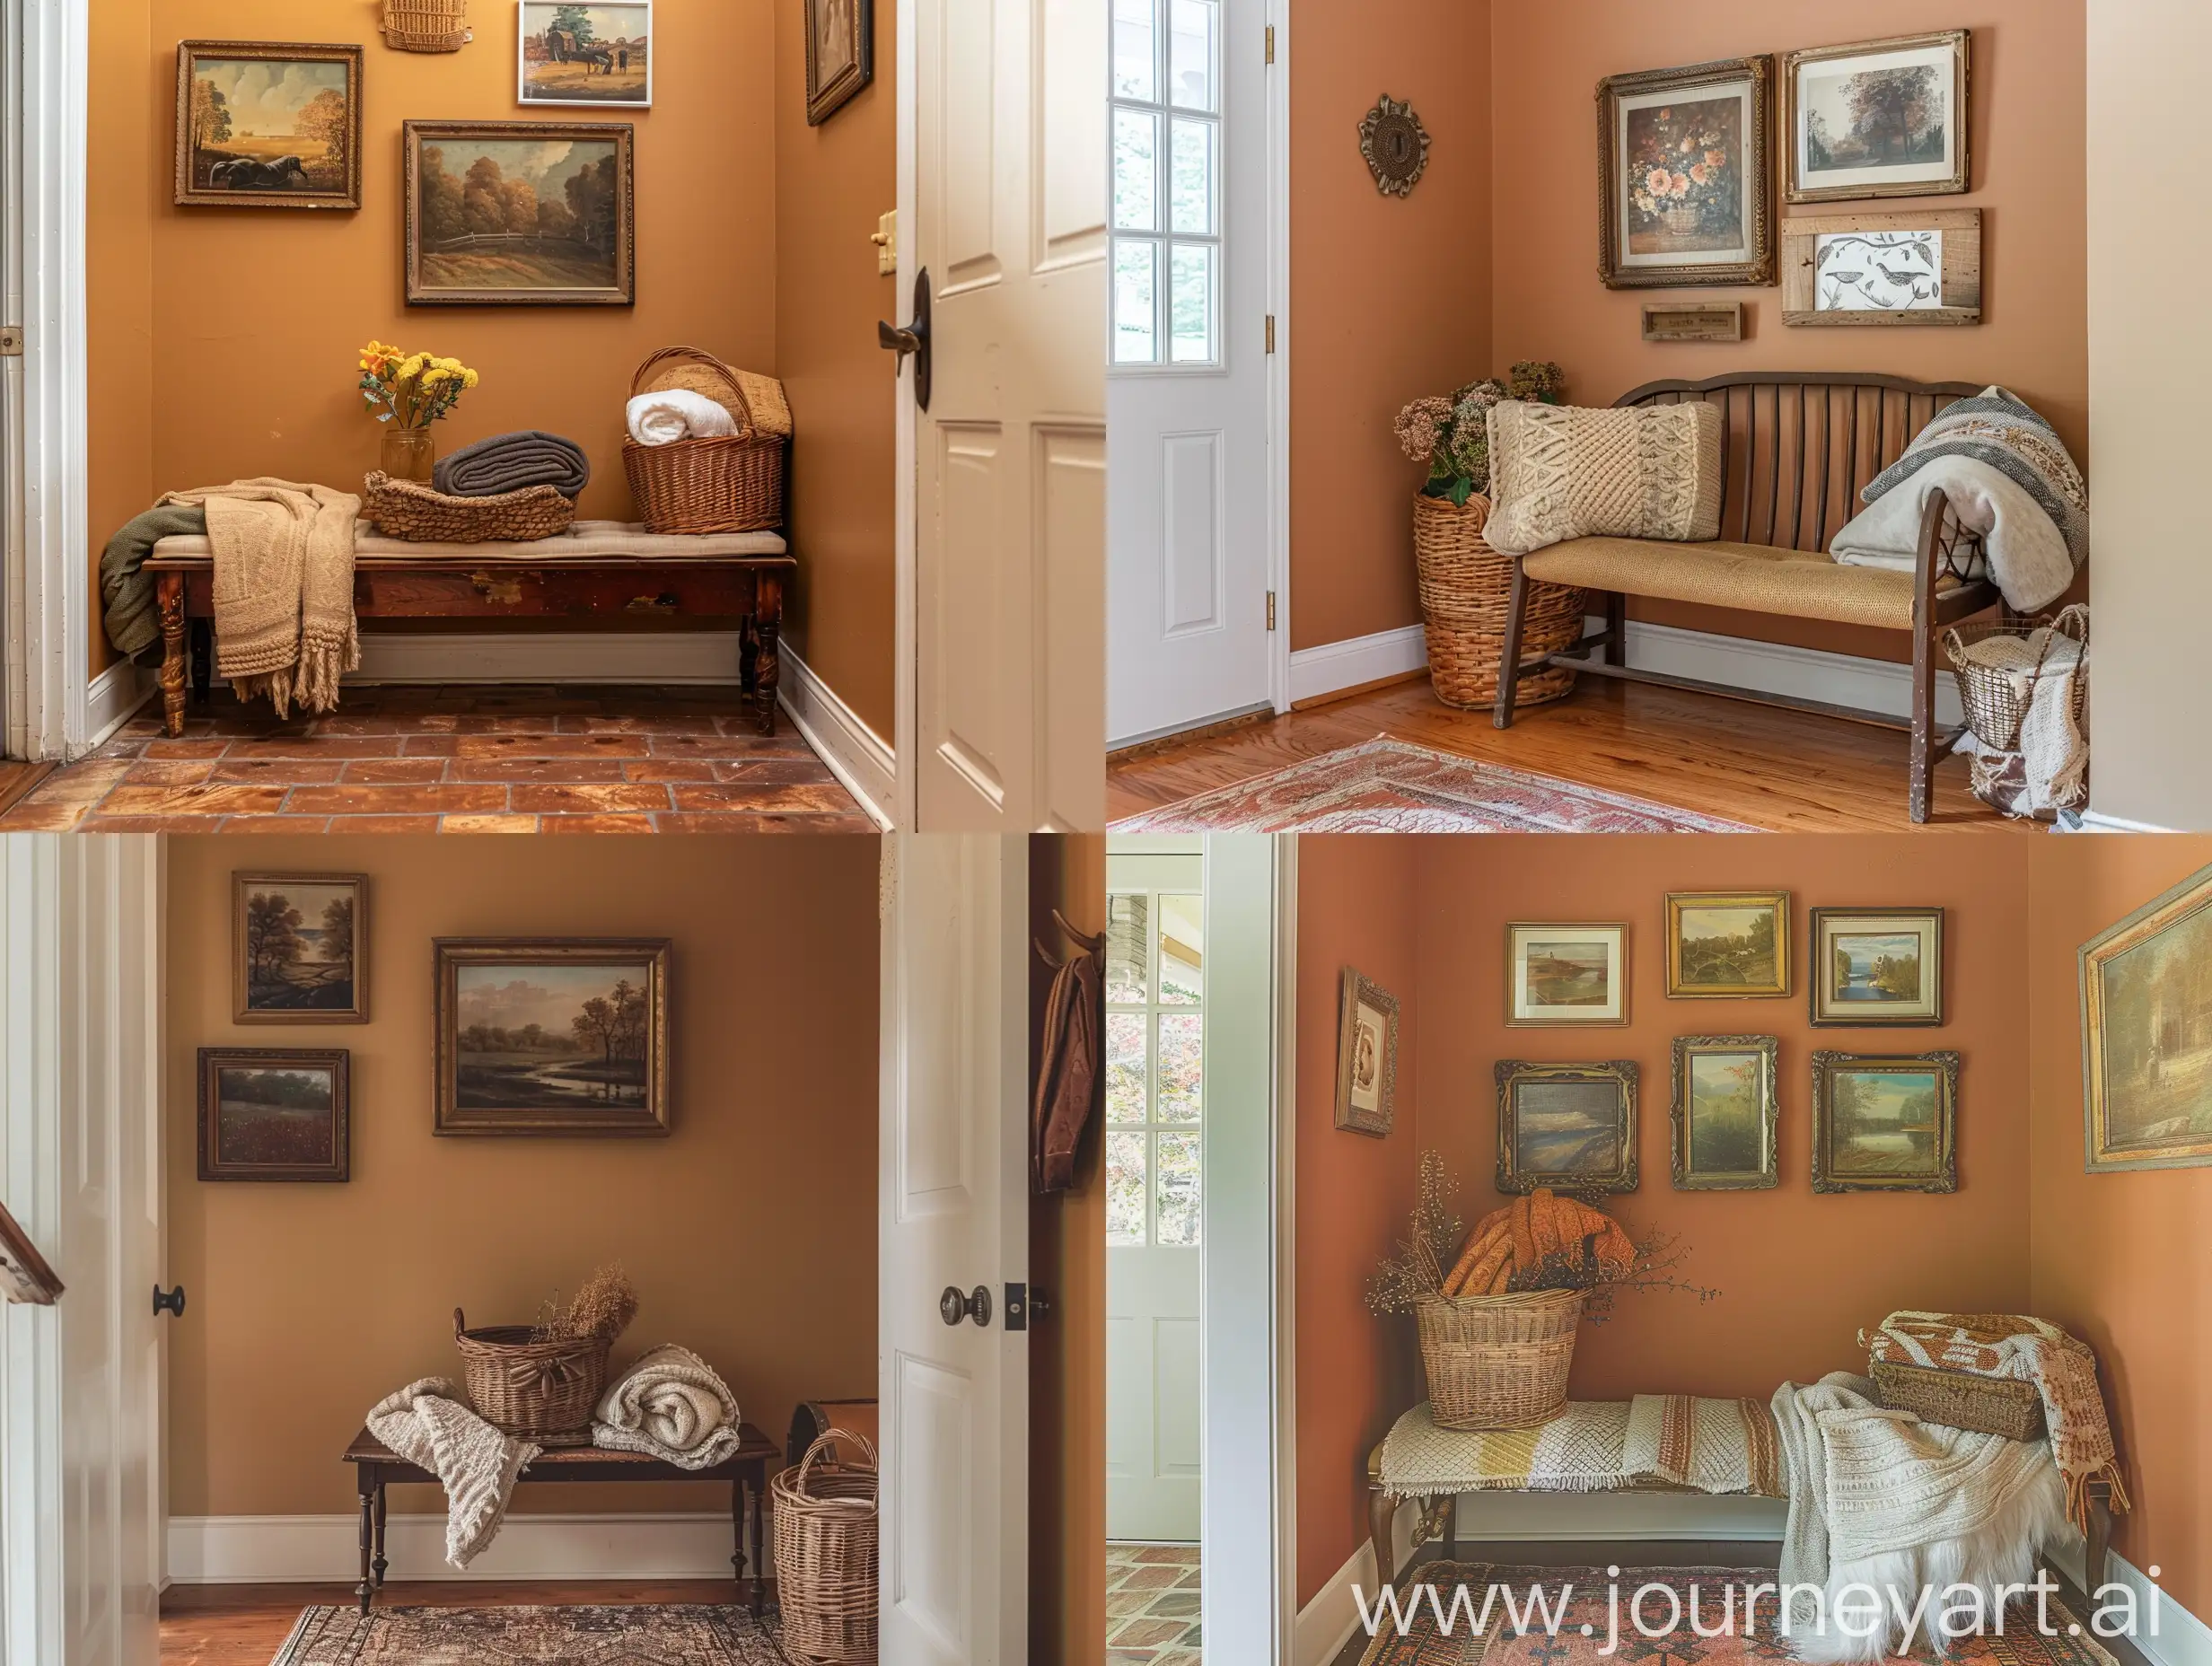 An entryway with a welcoming bench, a basket filled with blankets, and a collection of vintage artwork. The walls are painted in a warm, inviting hue.
